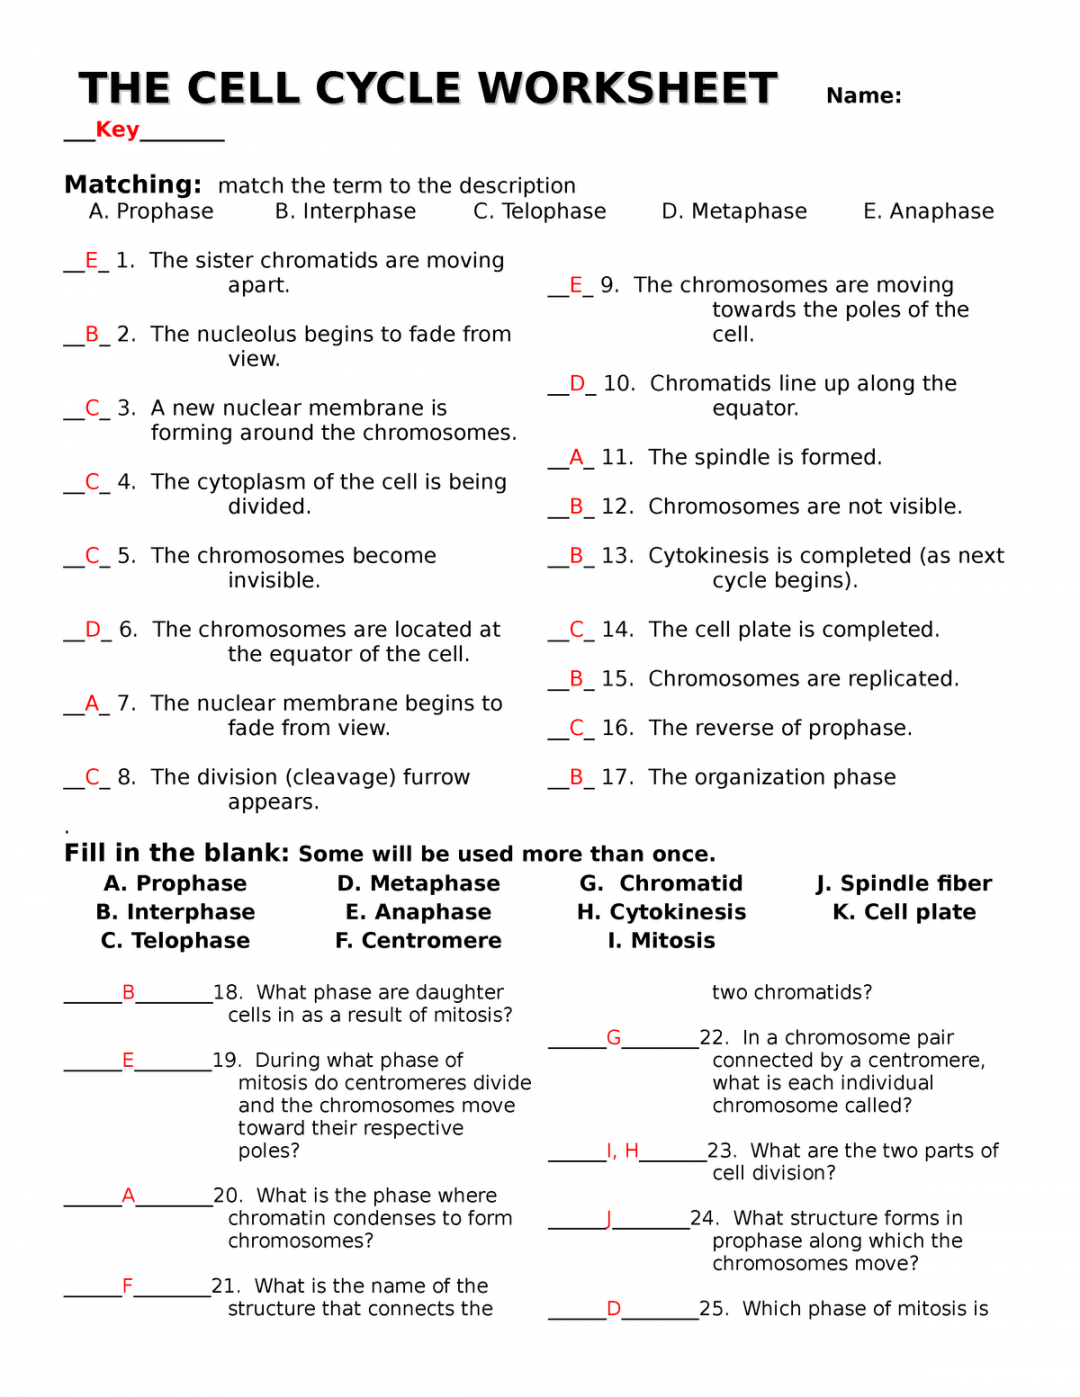 The-cell-cycle-worksheet with answers - THE CELL CYCLE WORKSHEET